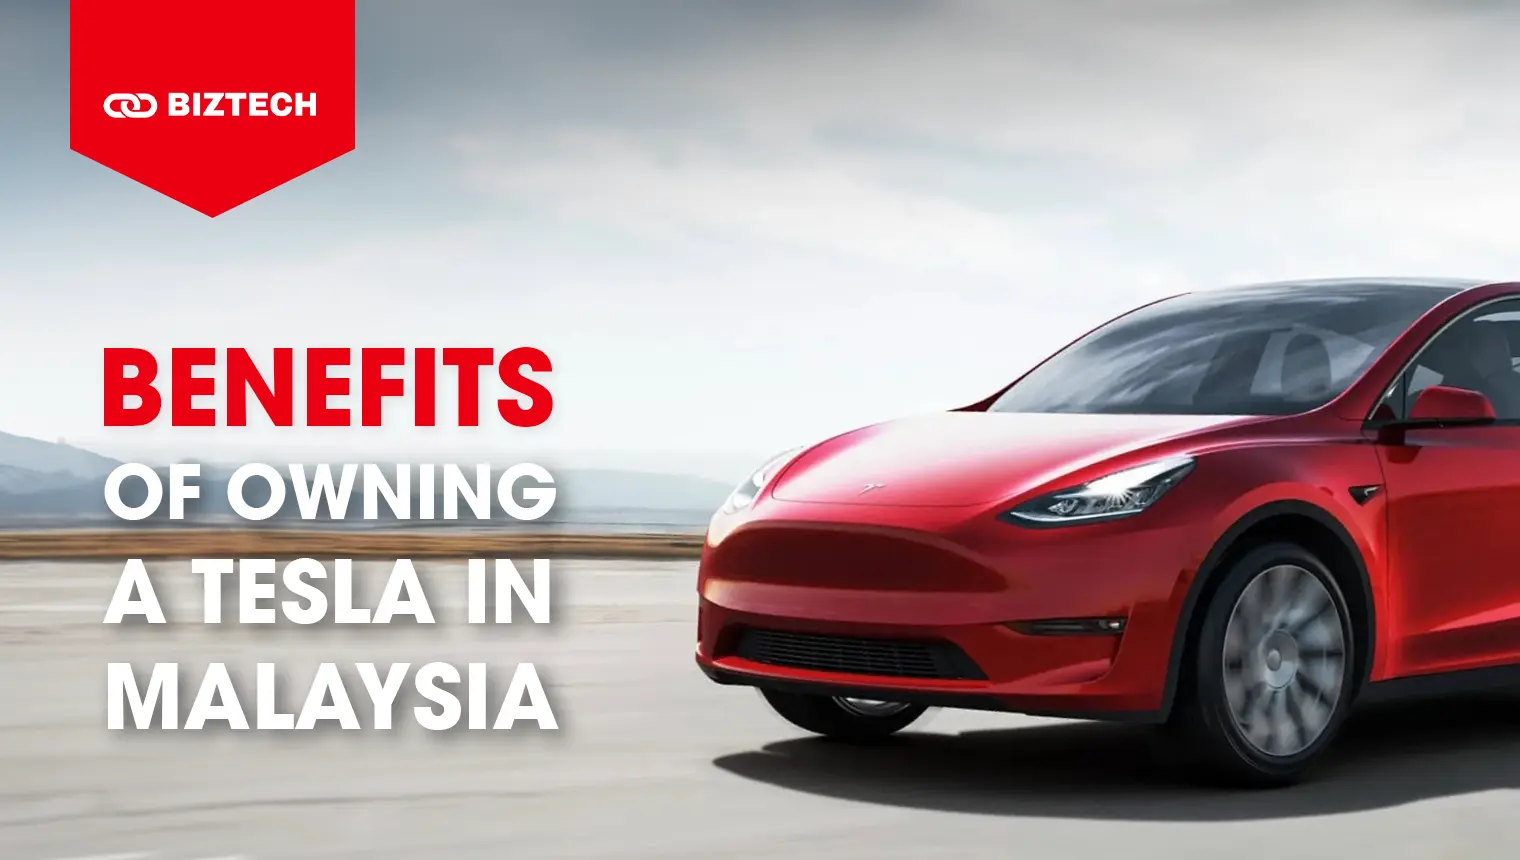 Benefits of owning a Tesla in Malaysia